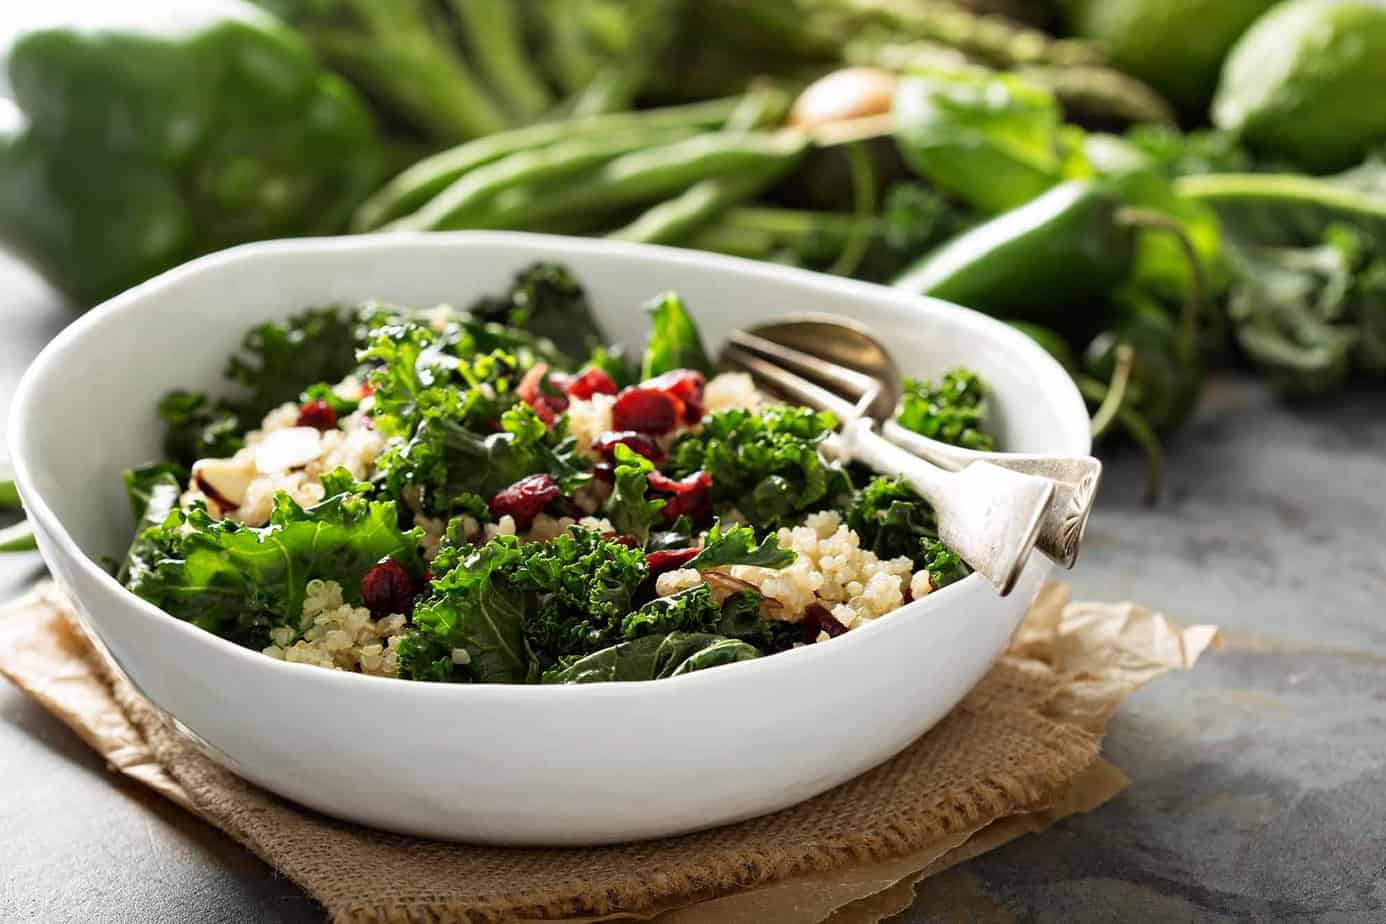 Veggie bowl with brown rice, kale, and cranberries with fork, spoon, and green vegetables in the background